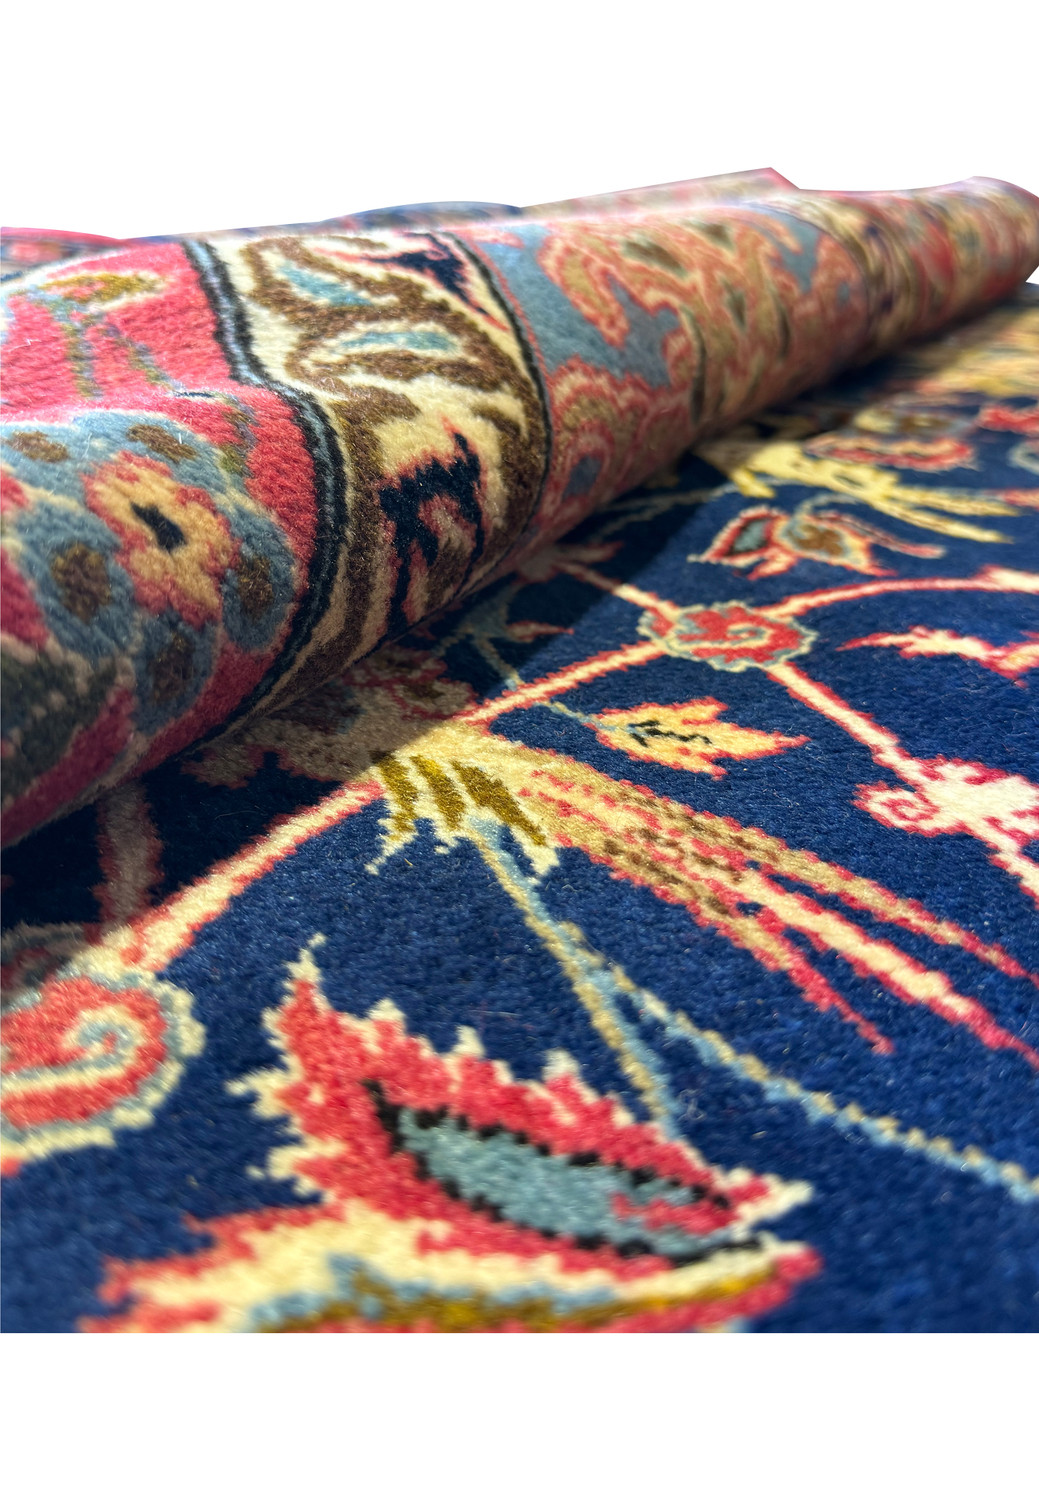 Rolled Persian Isfahan rug highlighting the plush texture and detailed patterns with a glimpse of the rug’s underside.